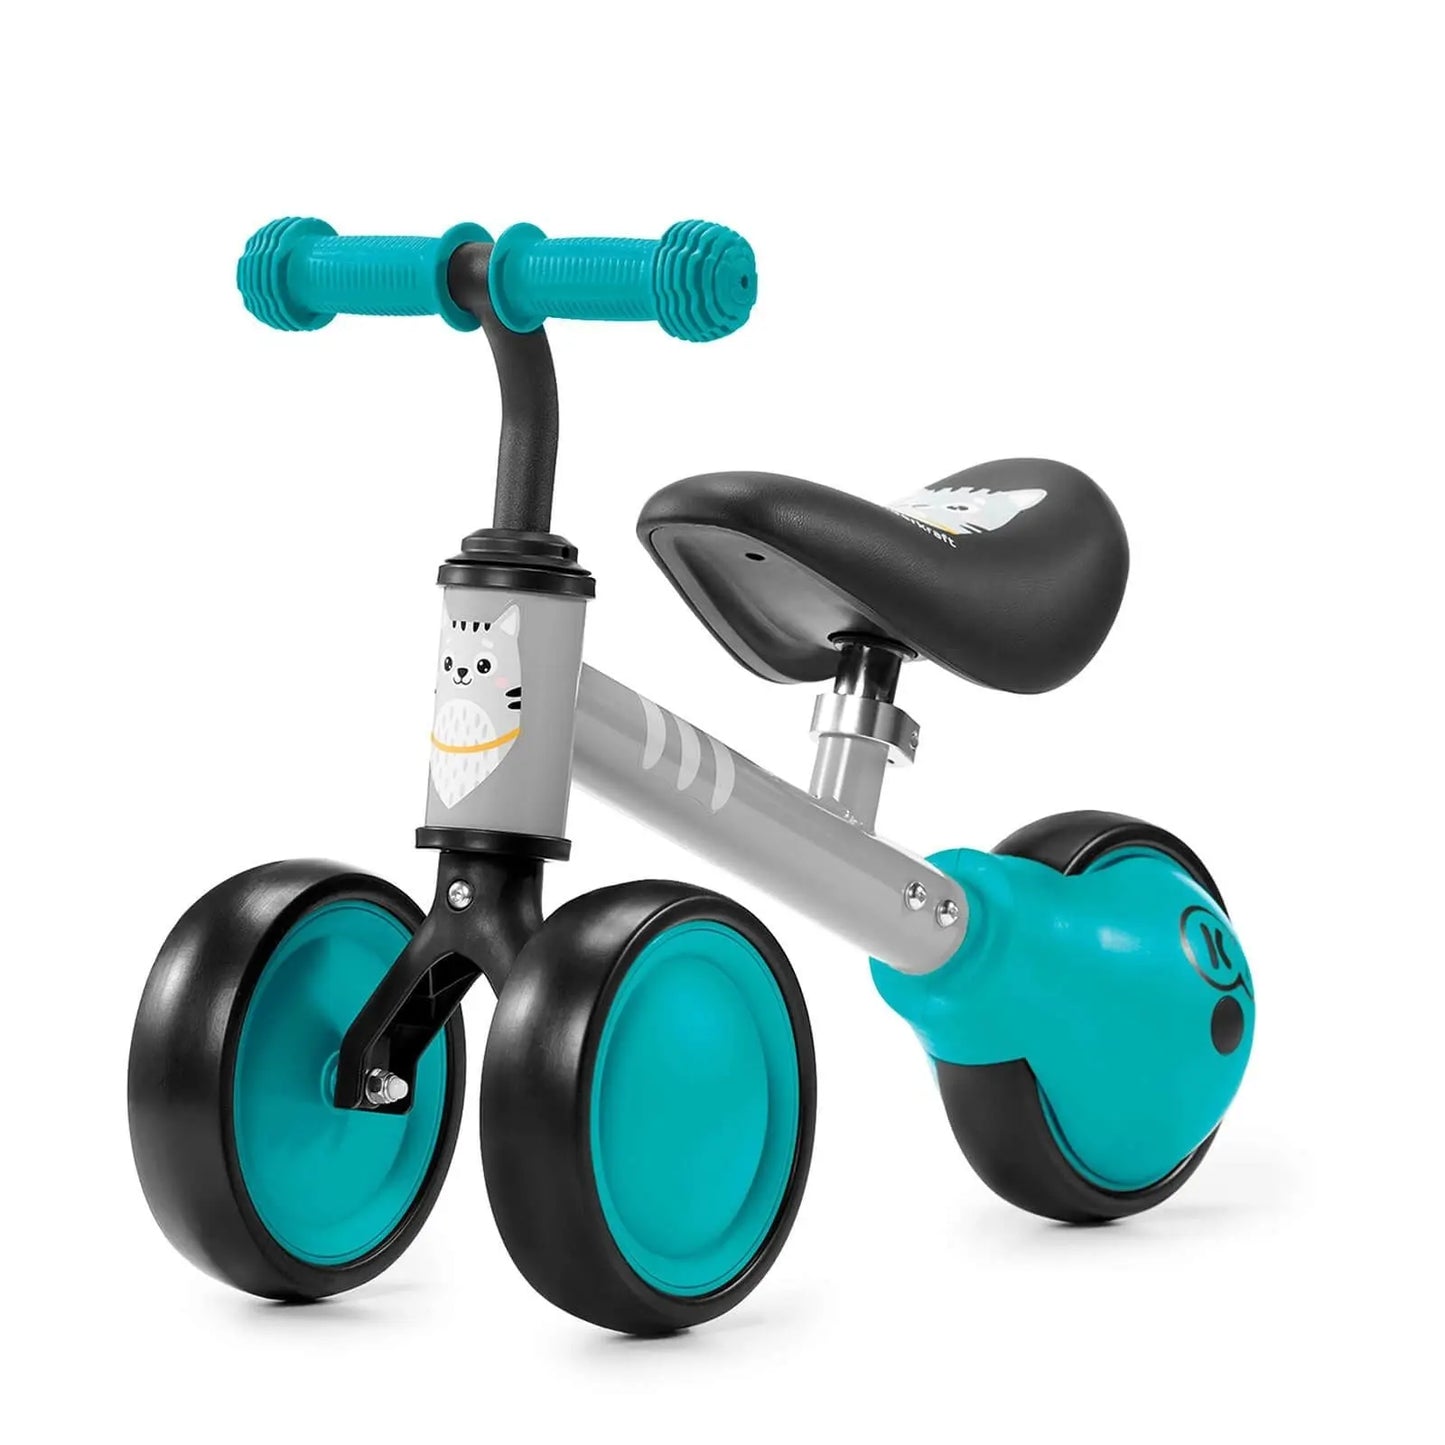 A blue and black balance bike with a kitten print, rubber handles, ball-bearing rear wheel, adjustable saddle, and strong steel frame.